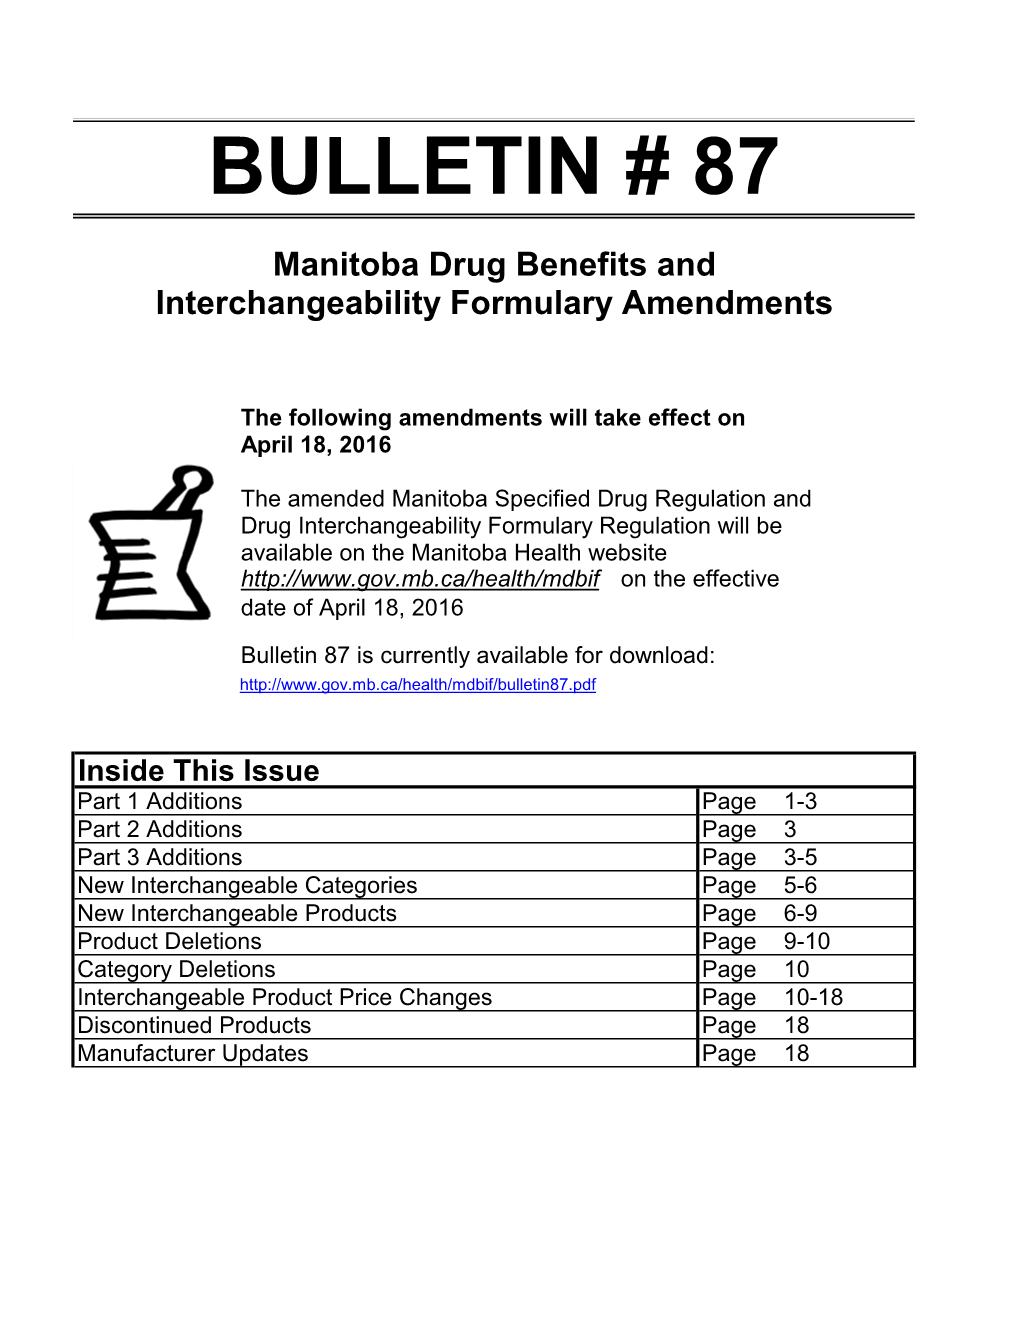 Bulletin 87 Is Currently Available for Download